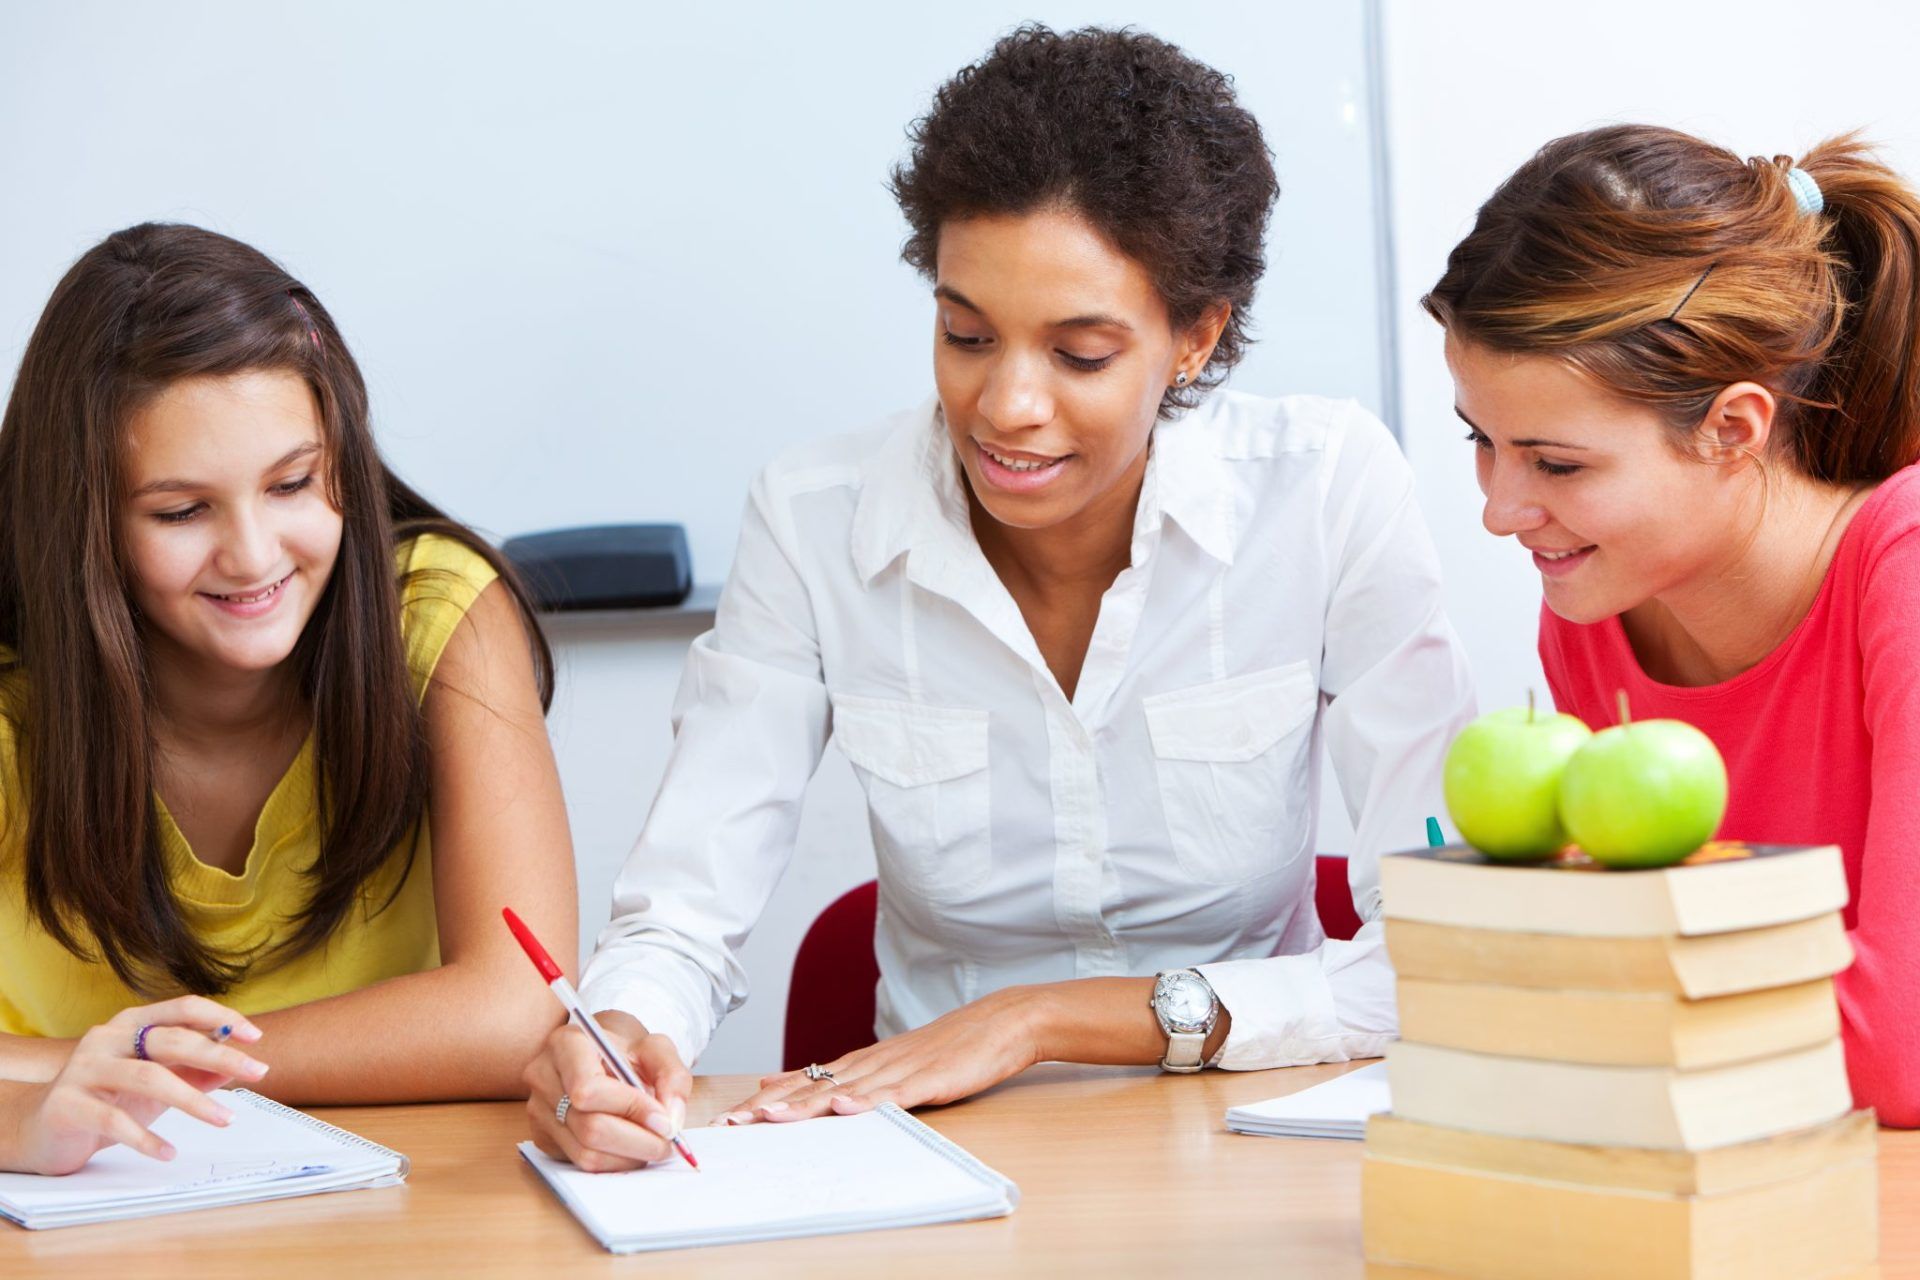 What are the pros and cons of being a substitute teacher?